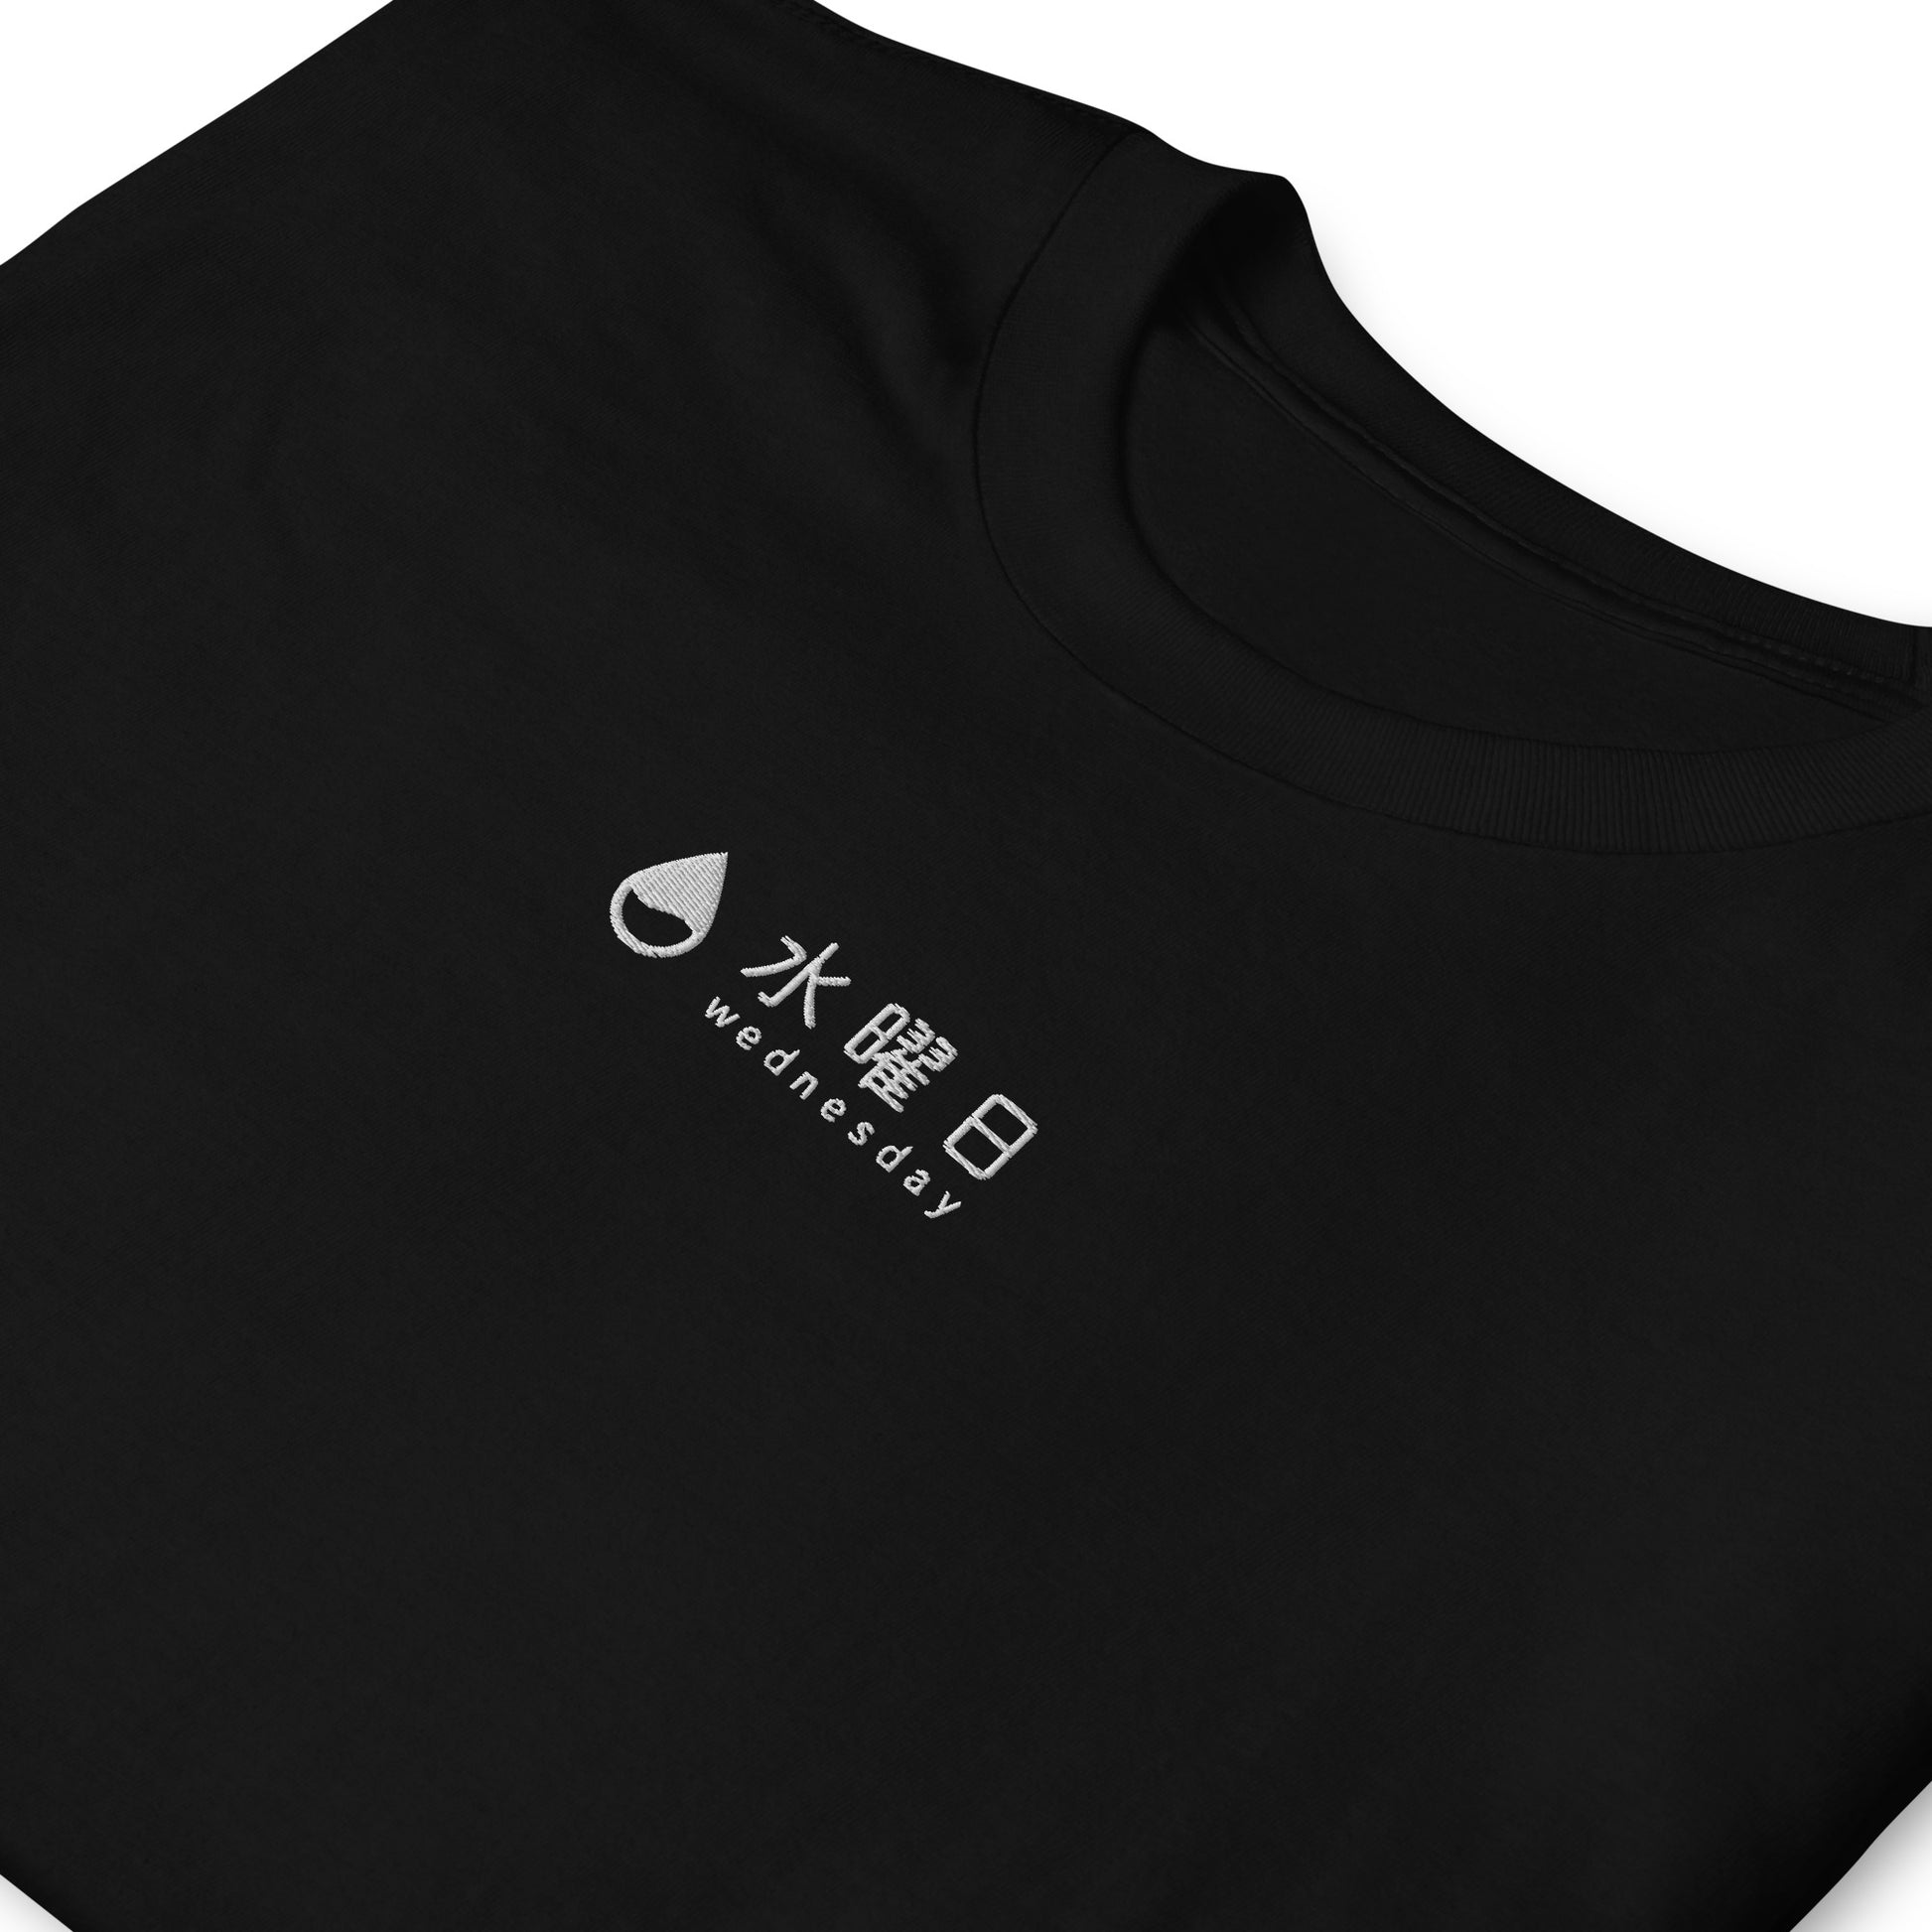 Black High Quality Tee - Front Design with a white Embroidery "Wednesday" in Japanese and English